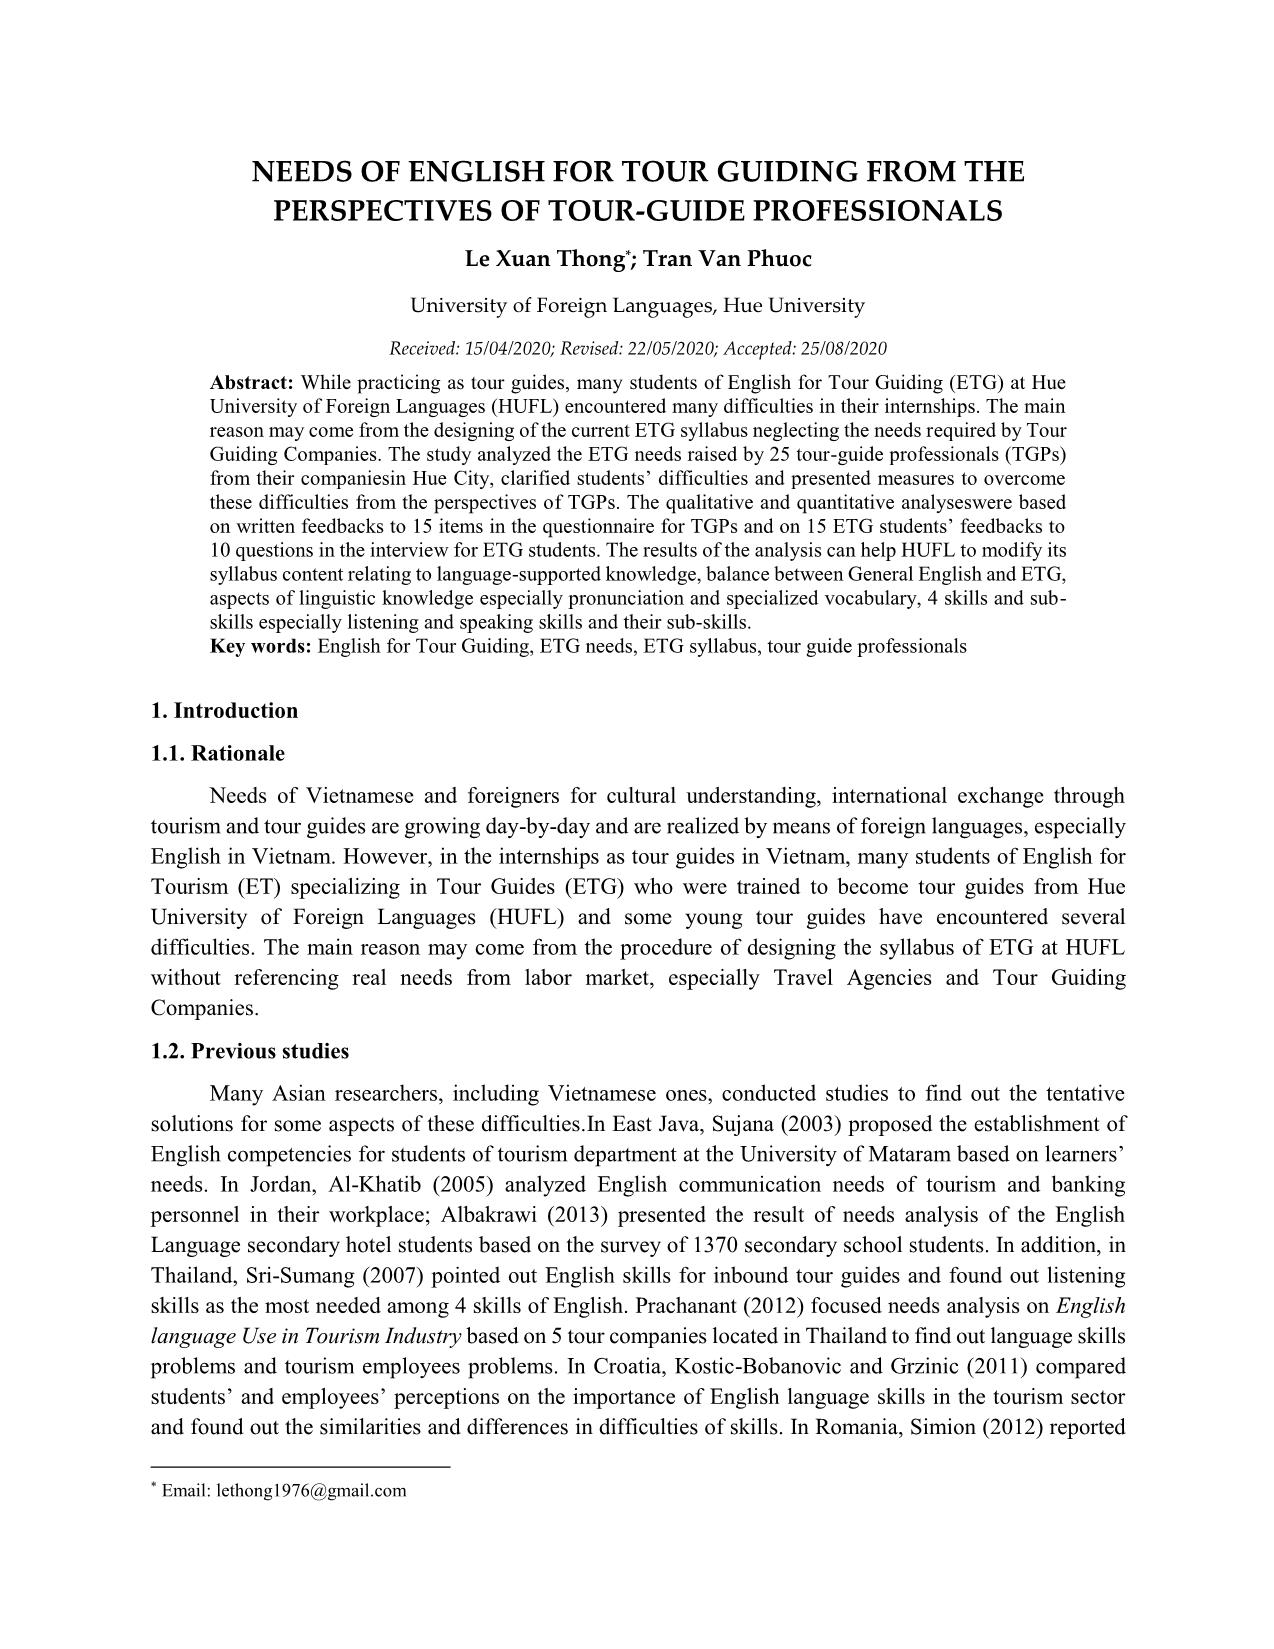 Needs of english for tour guiding from the perspectives of tour-guide professionals trang 1